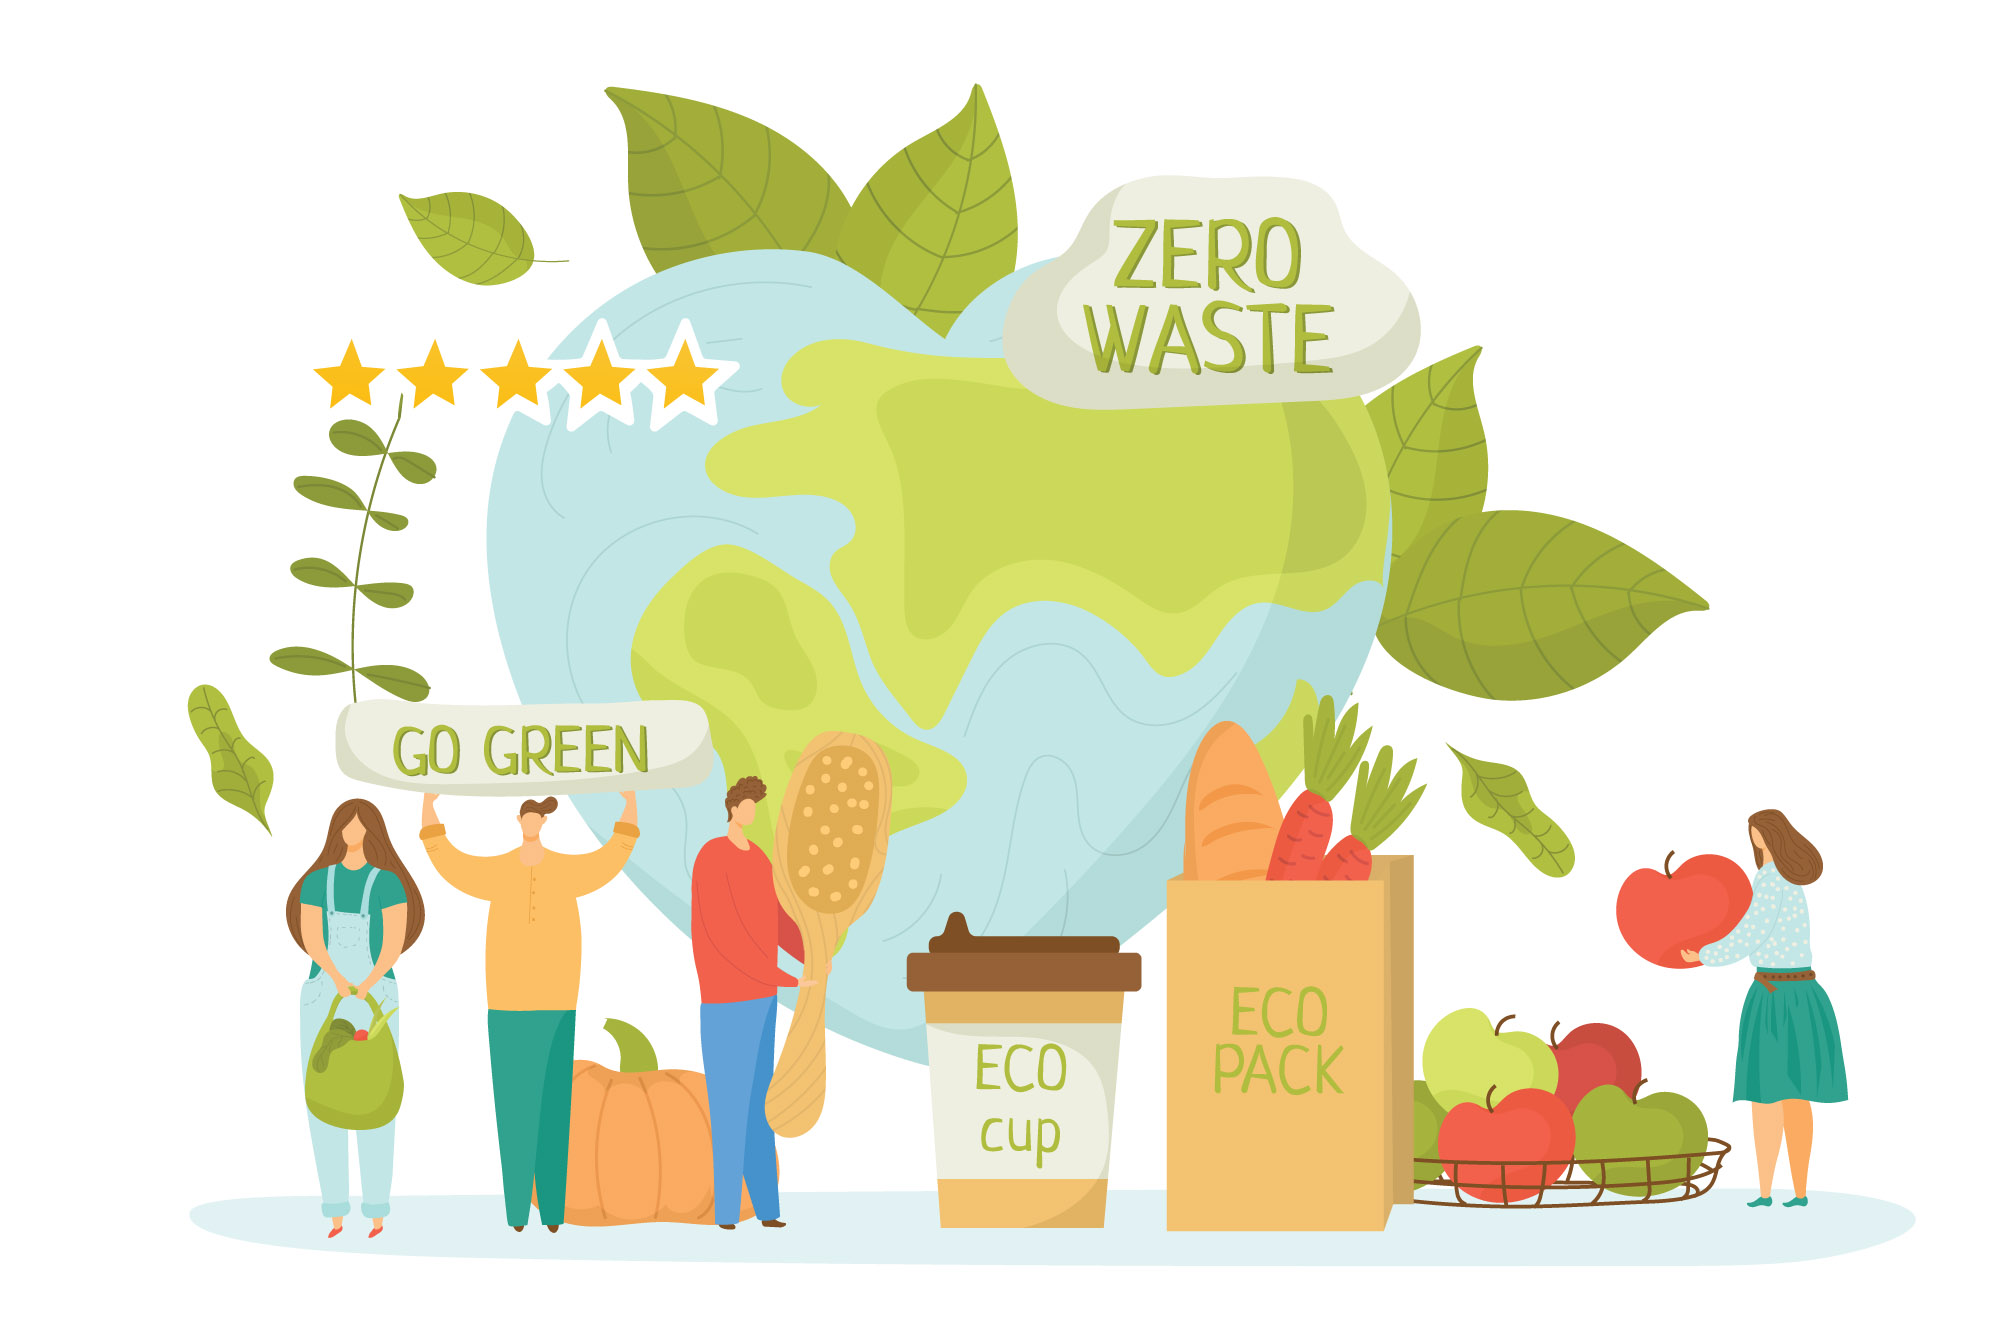 Chapter 5: Reduce Waste – Save Money and the Environment